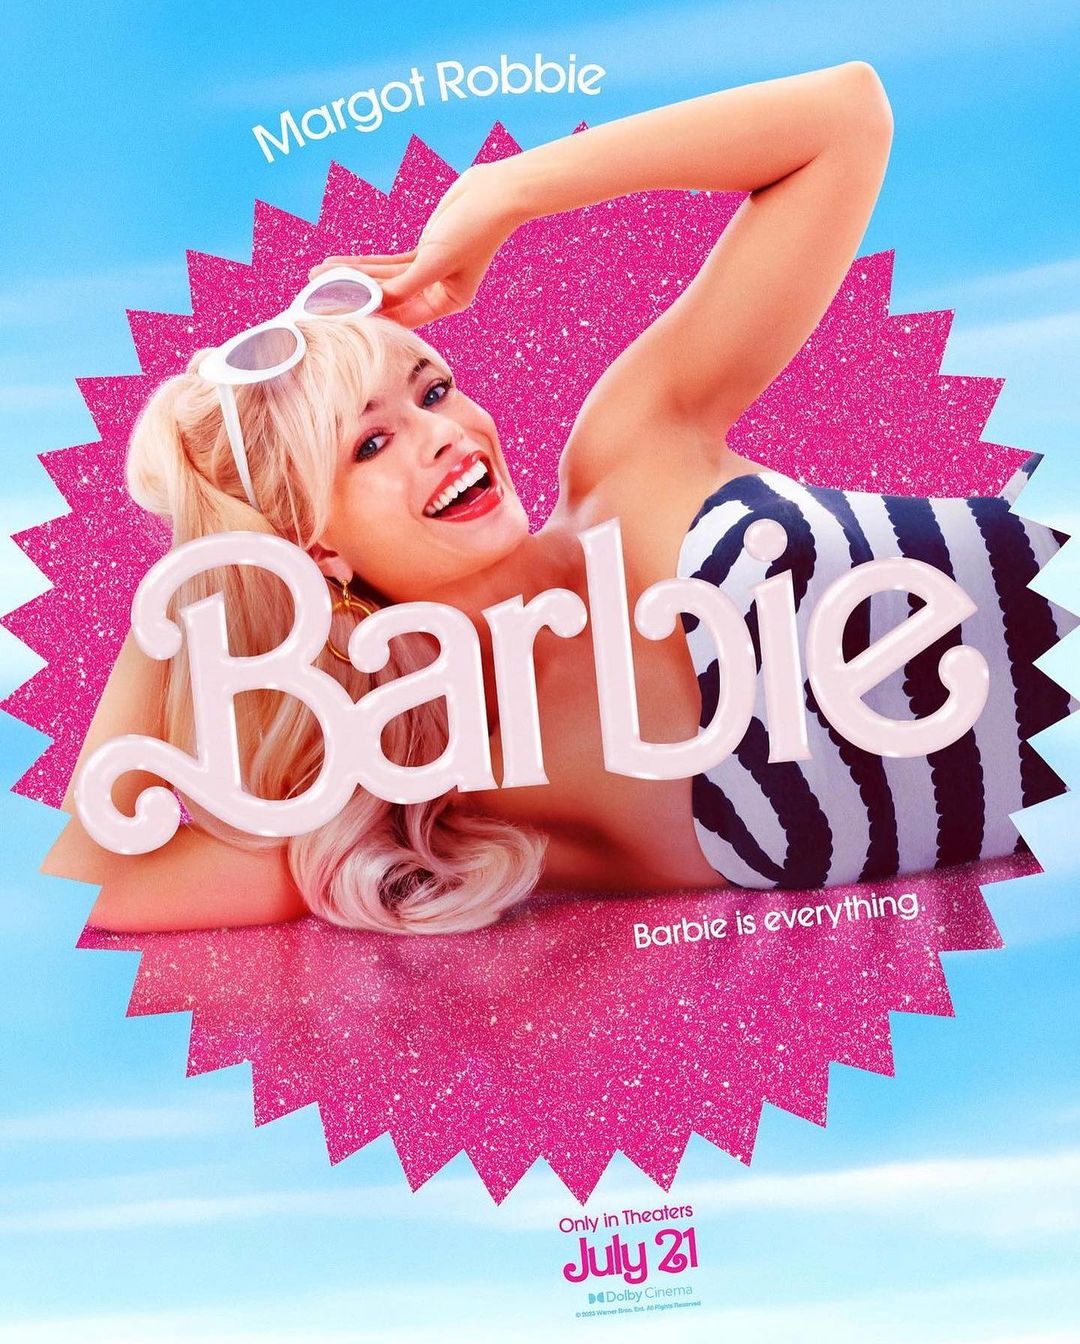 Promotion of the Barbie movie became a meme on the networks.  Playback/Instagram